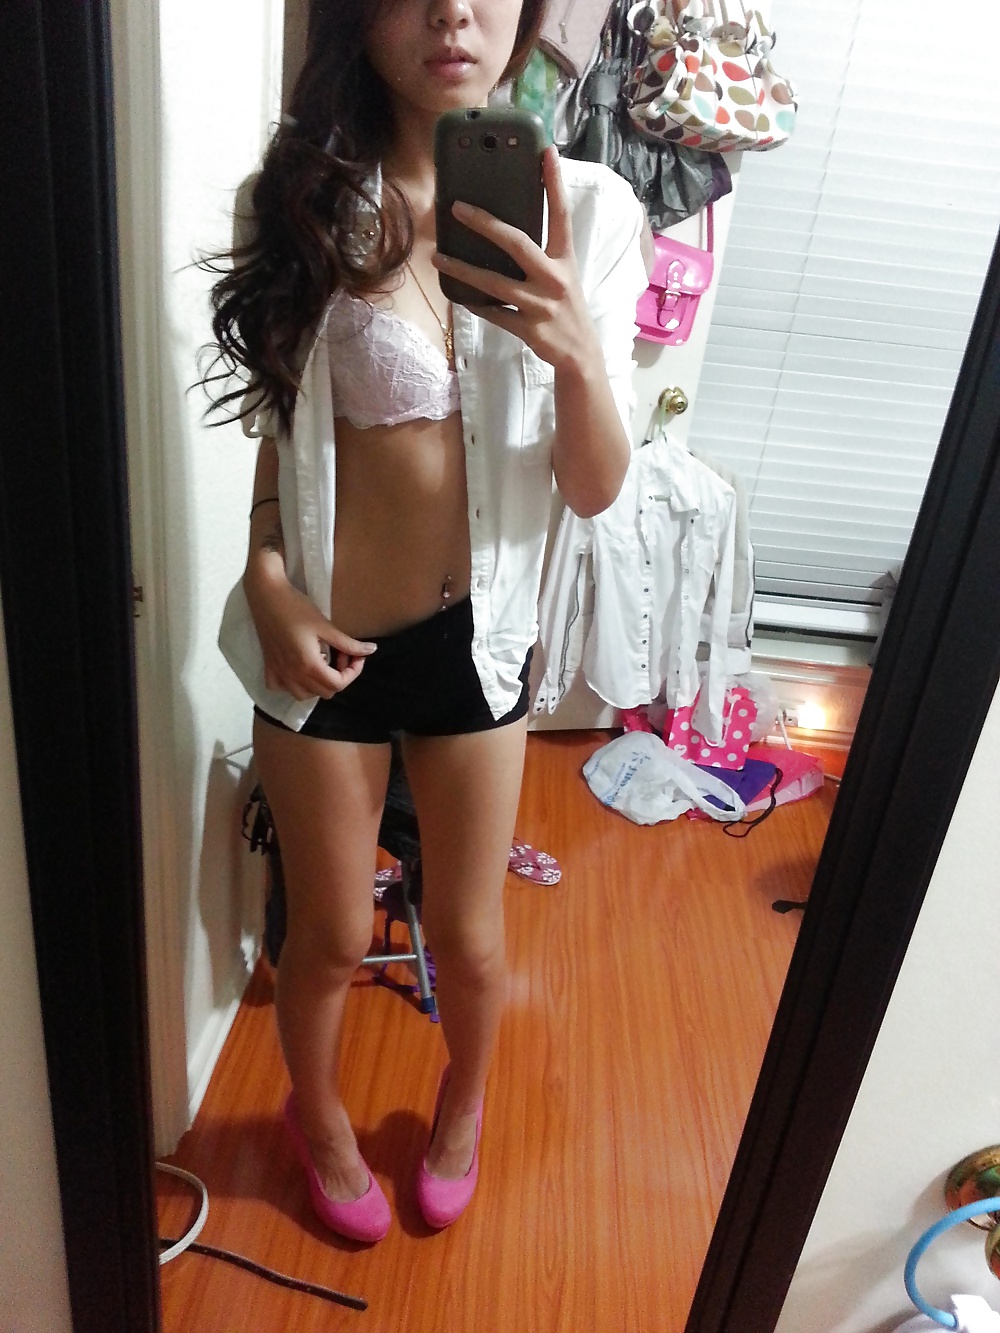 Amateurs Asian Delights 22 - Cute selfshooter pict gal